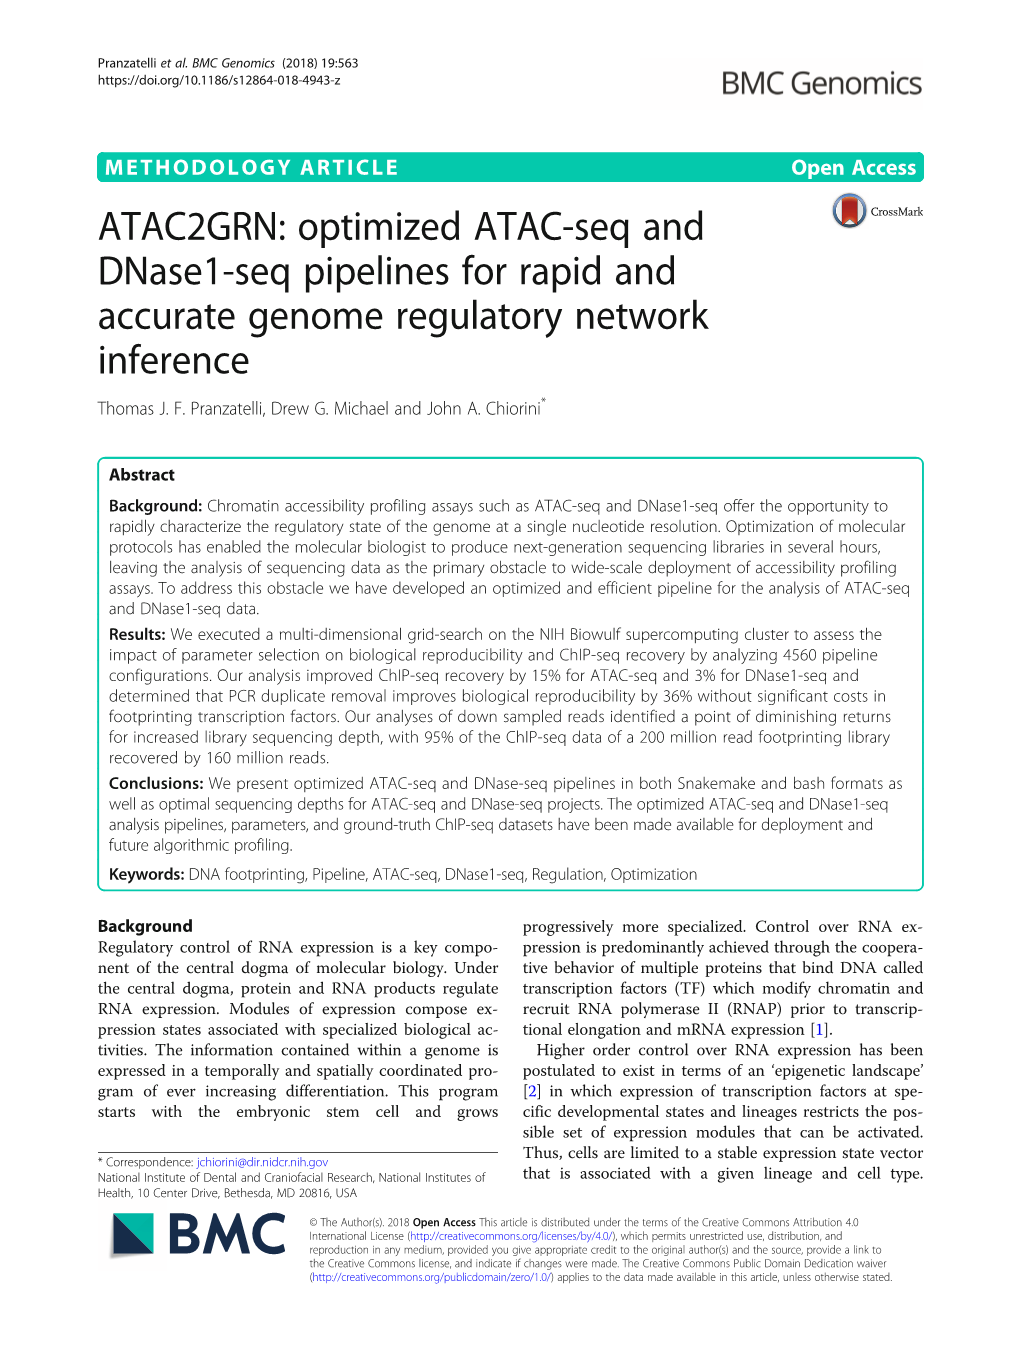 Optimized ATAC-Seq and Dnase1-Seq Pipelines for Rapid and Accurate Genome Regulatory Network Inference Thomas J